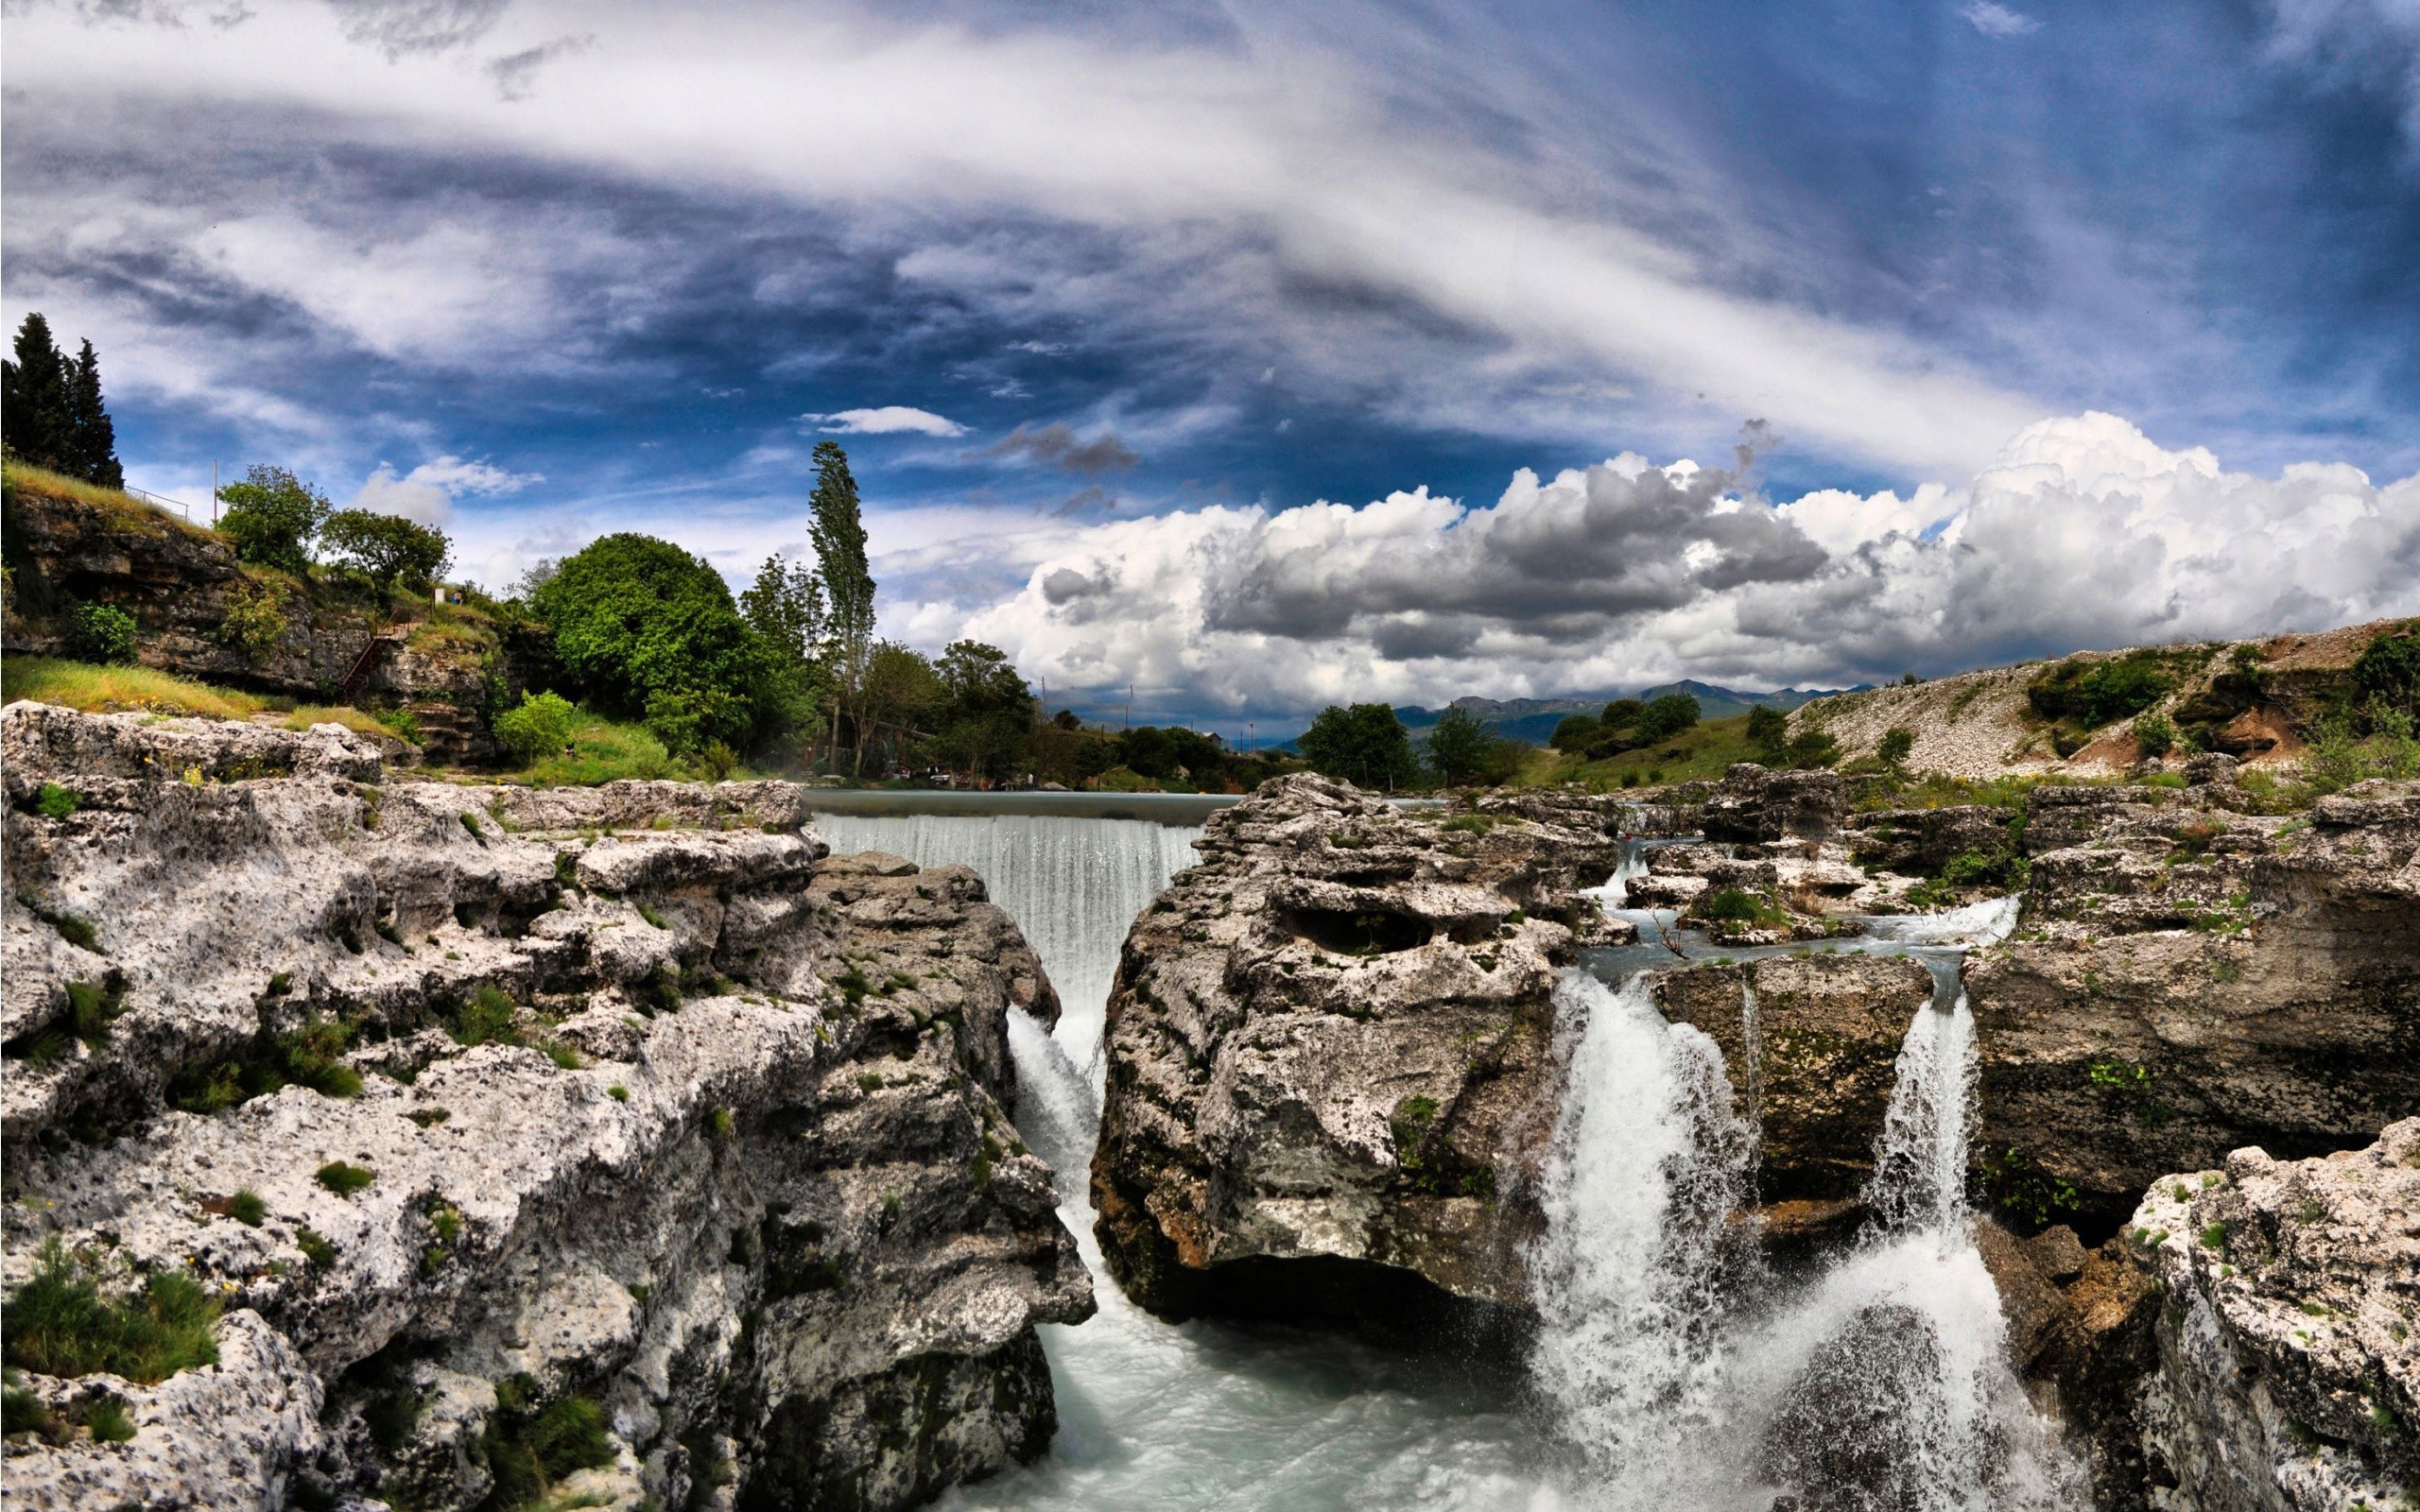 General 2560x1600 landscape nature waterfall clouds river